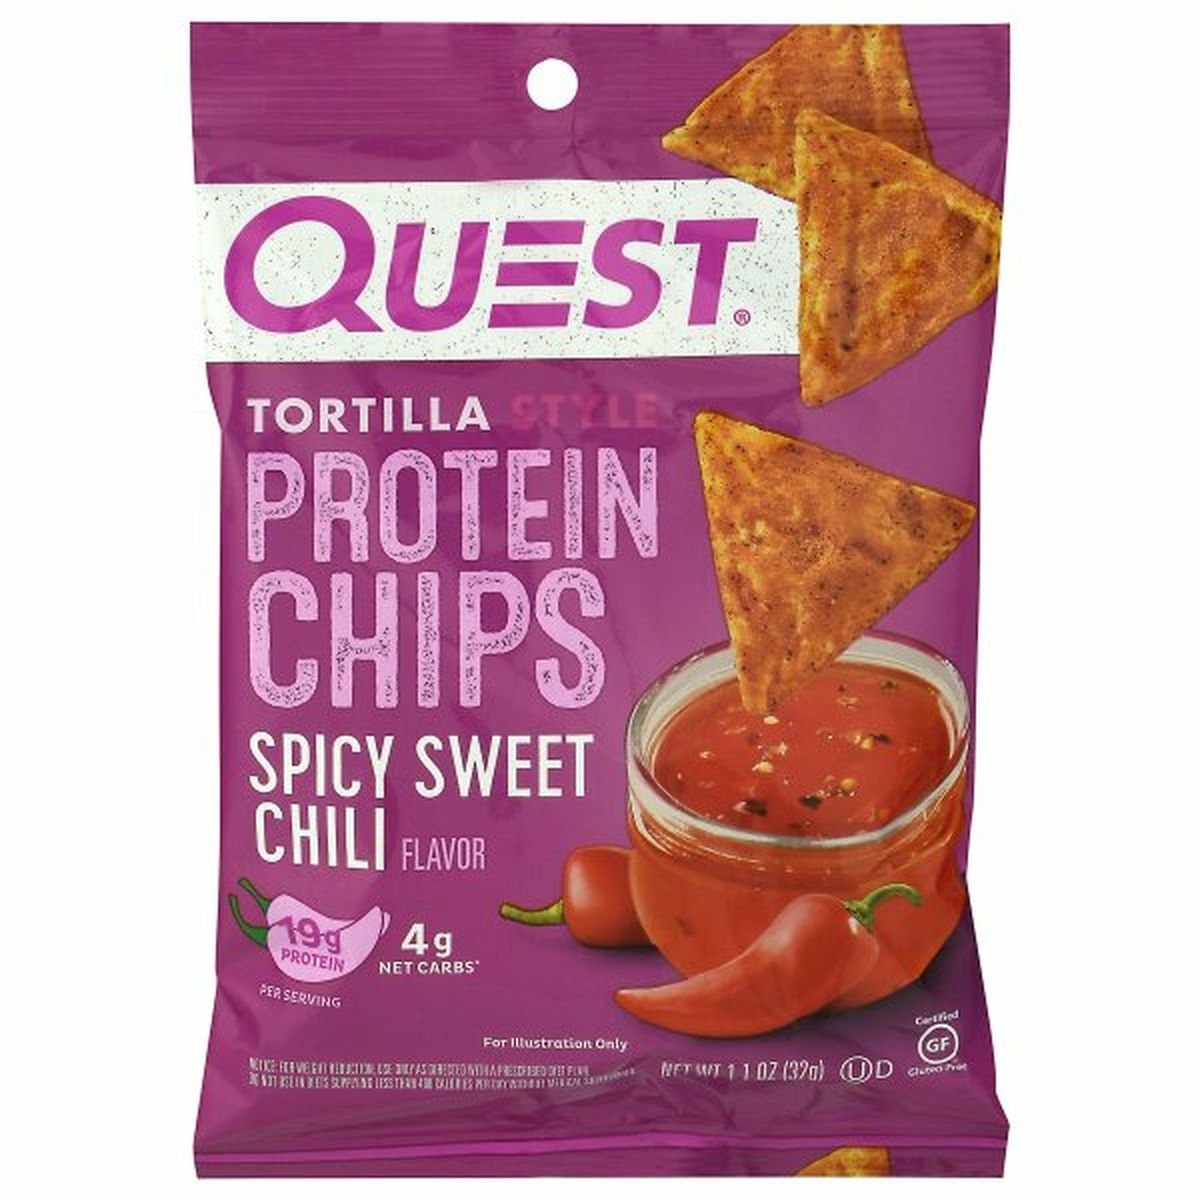 Calories in Quest Protein Chips, Spicy Sweet Chili Flavor, Tortilla Style